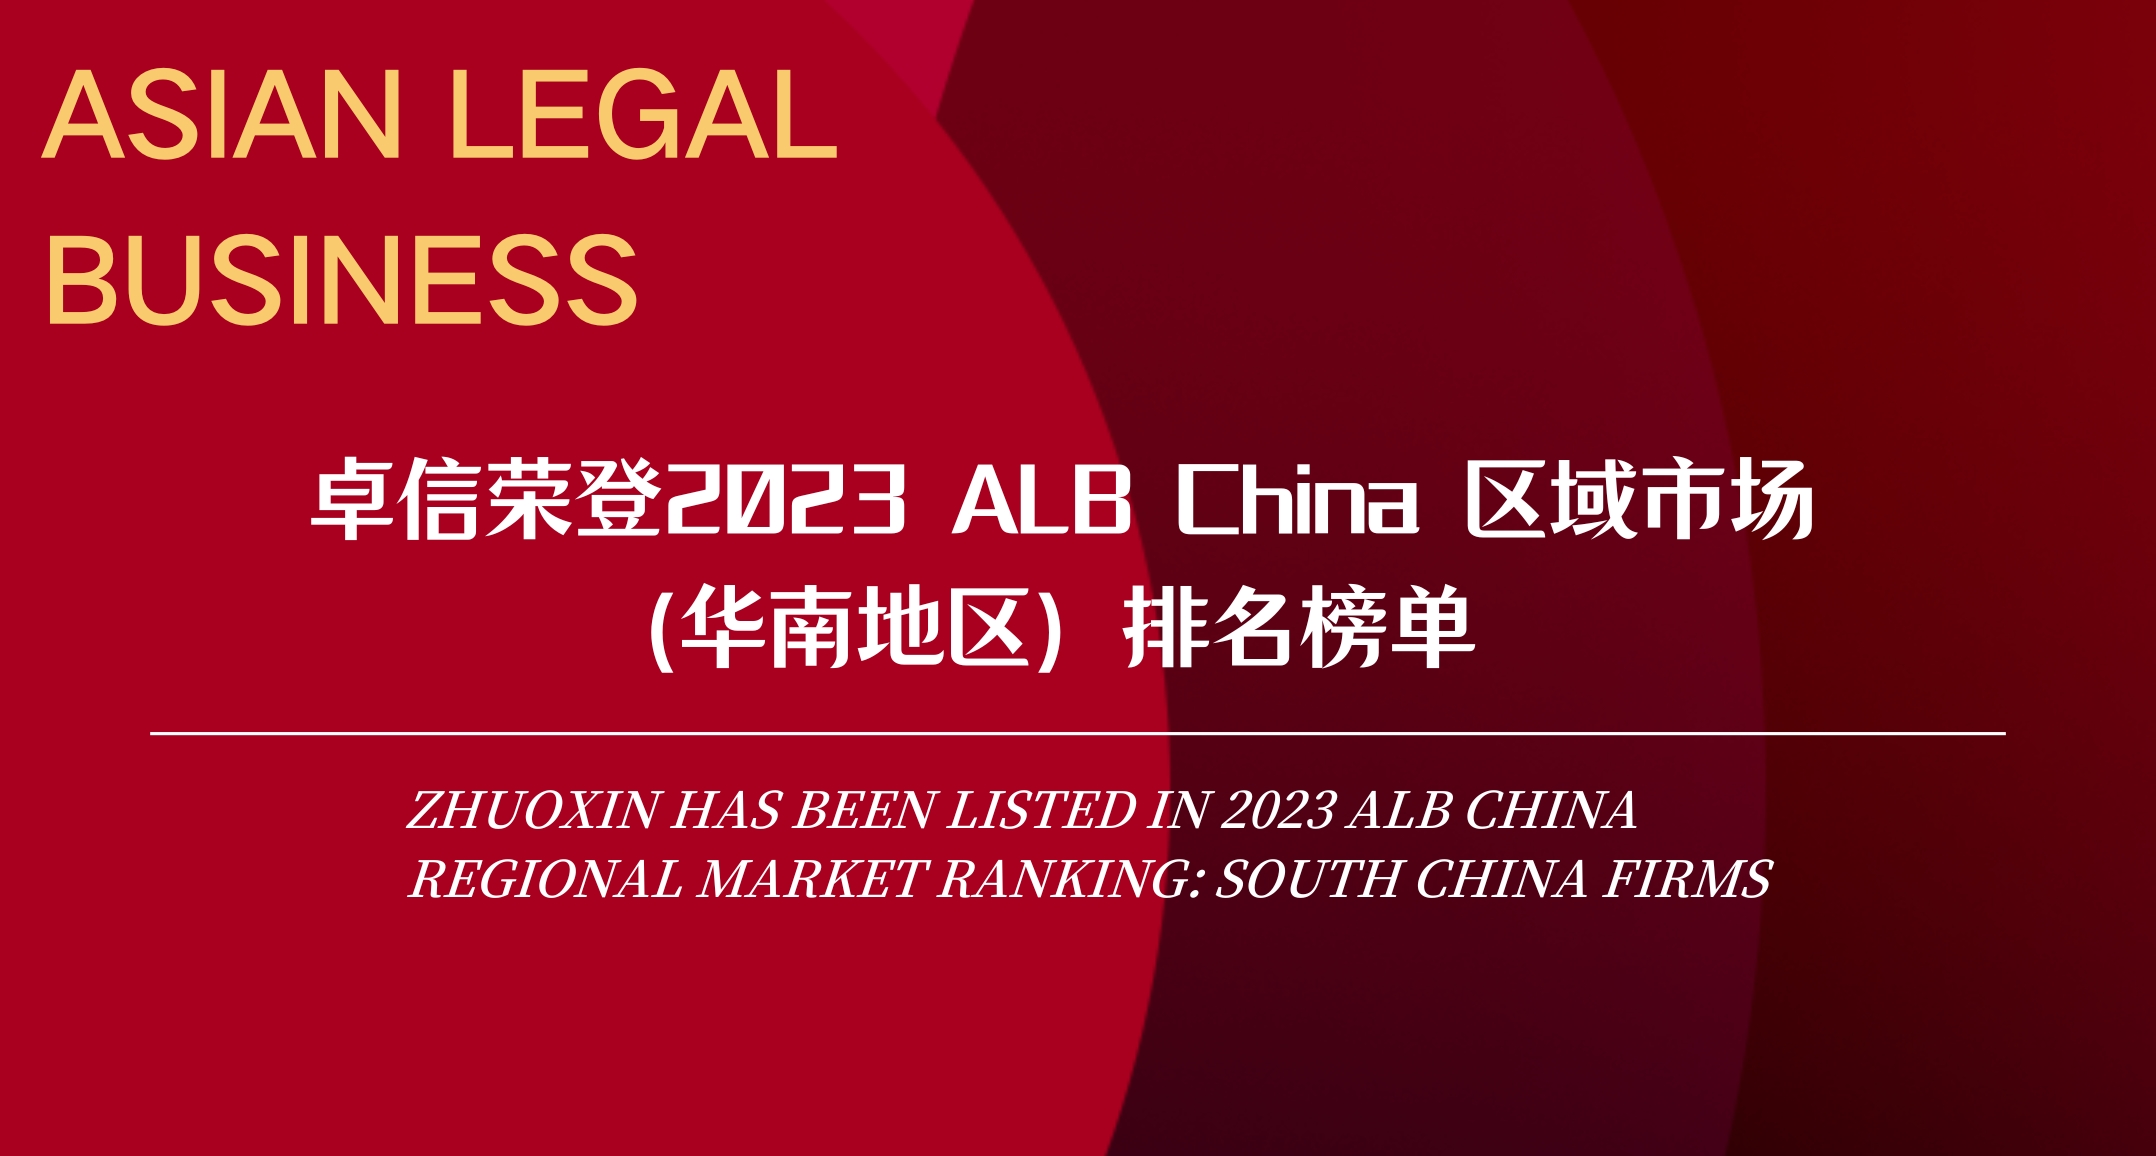 Zhuoxin Has Been Listed in 2023 ALB China Regional Market Ranking: South China Firms